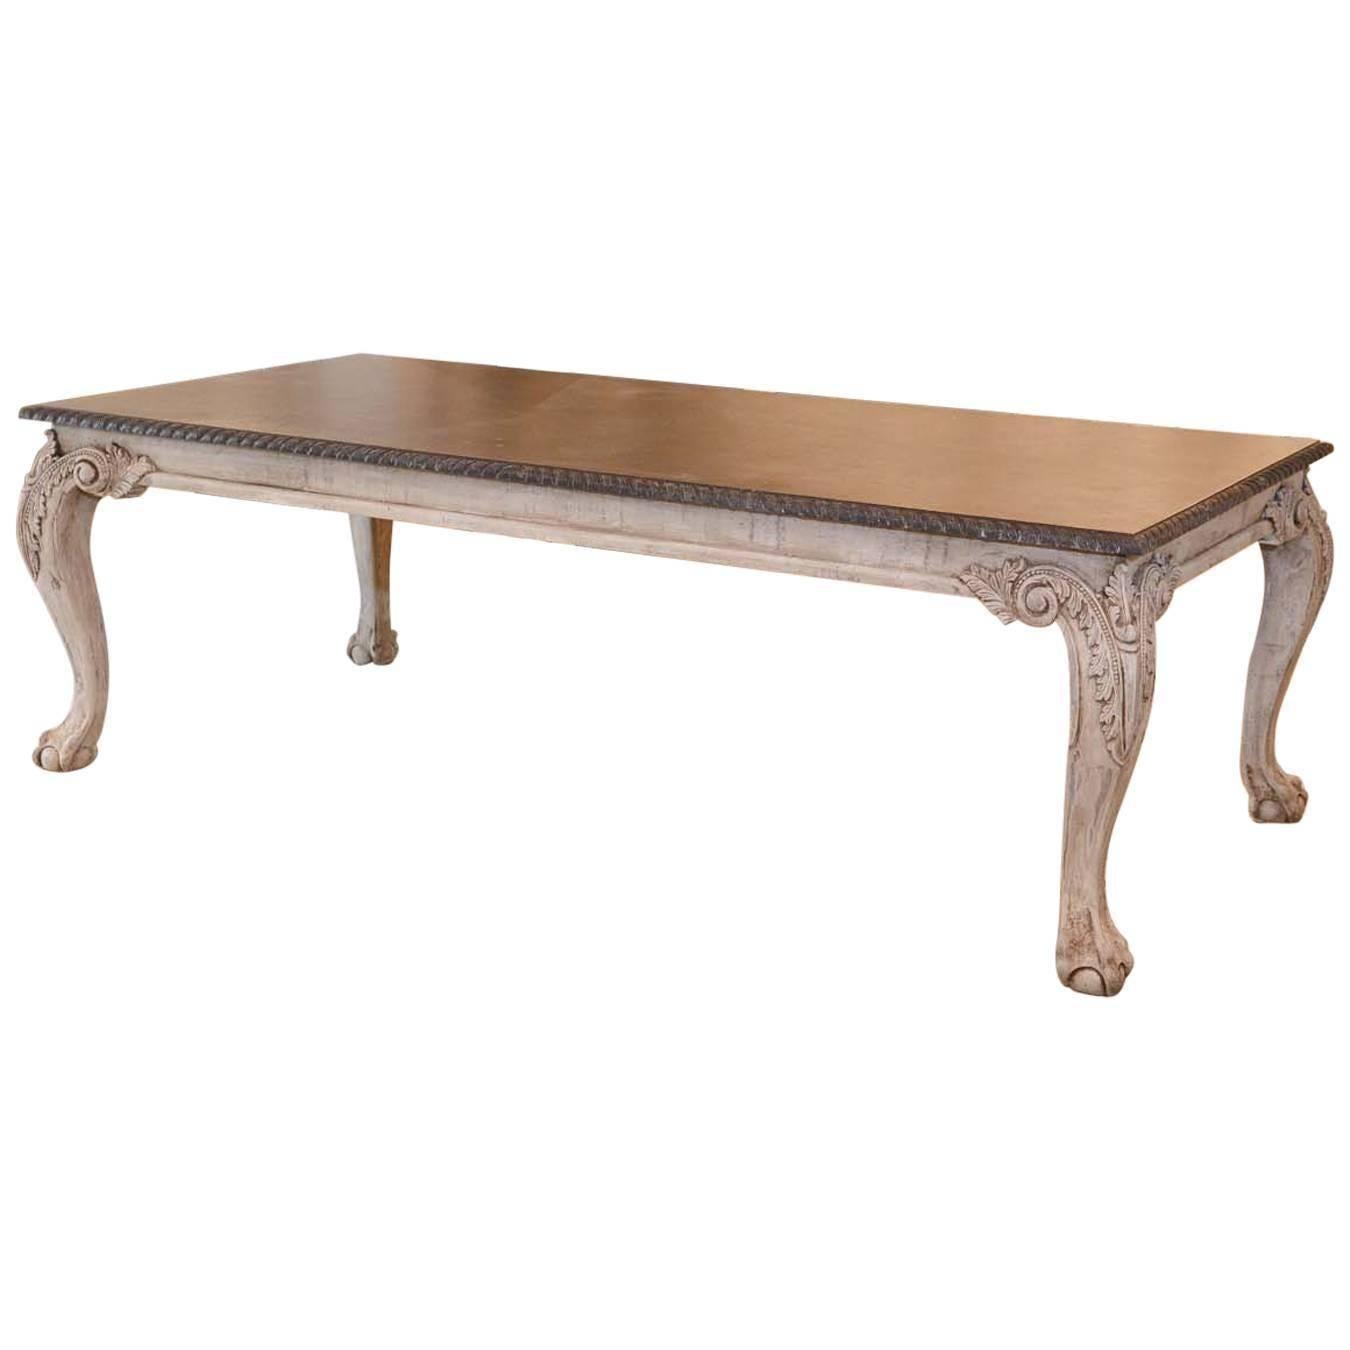 Oversized Chippendale Dining Table with Faux Marble Top and Distressed Finish